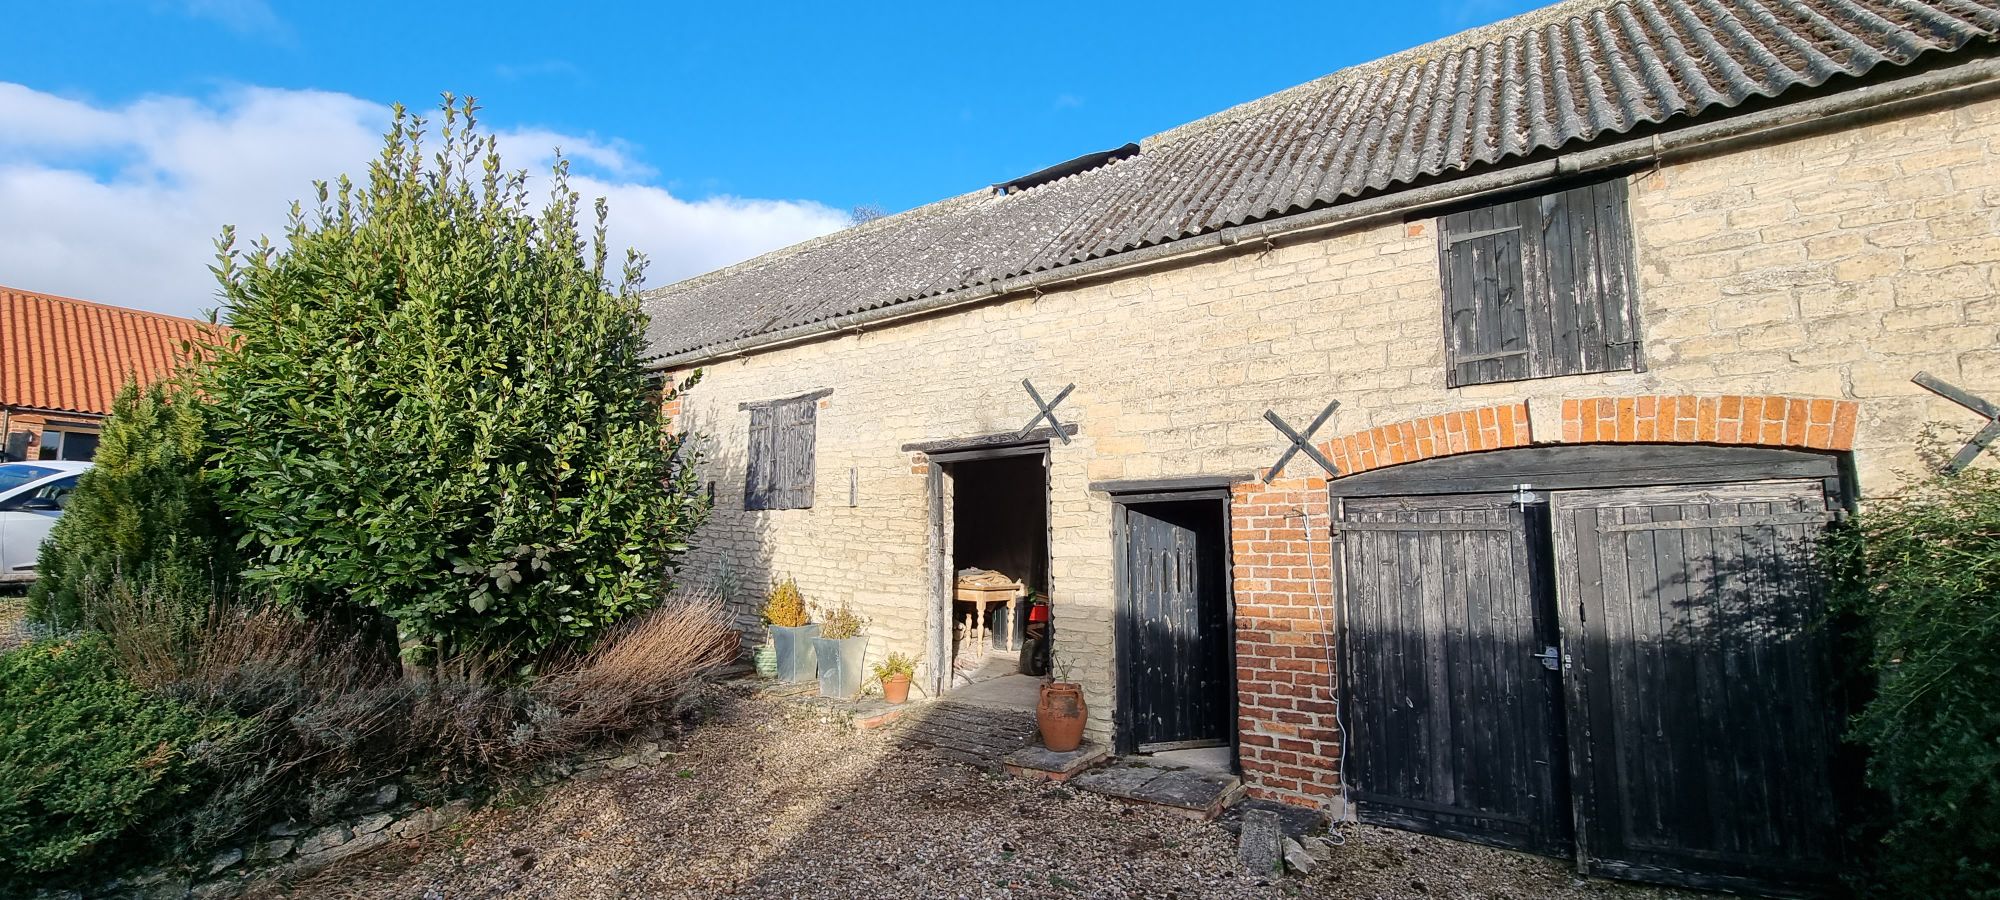 Listed Barn Conversion - Combining heritage and architecture to create stunning homes